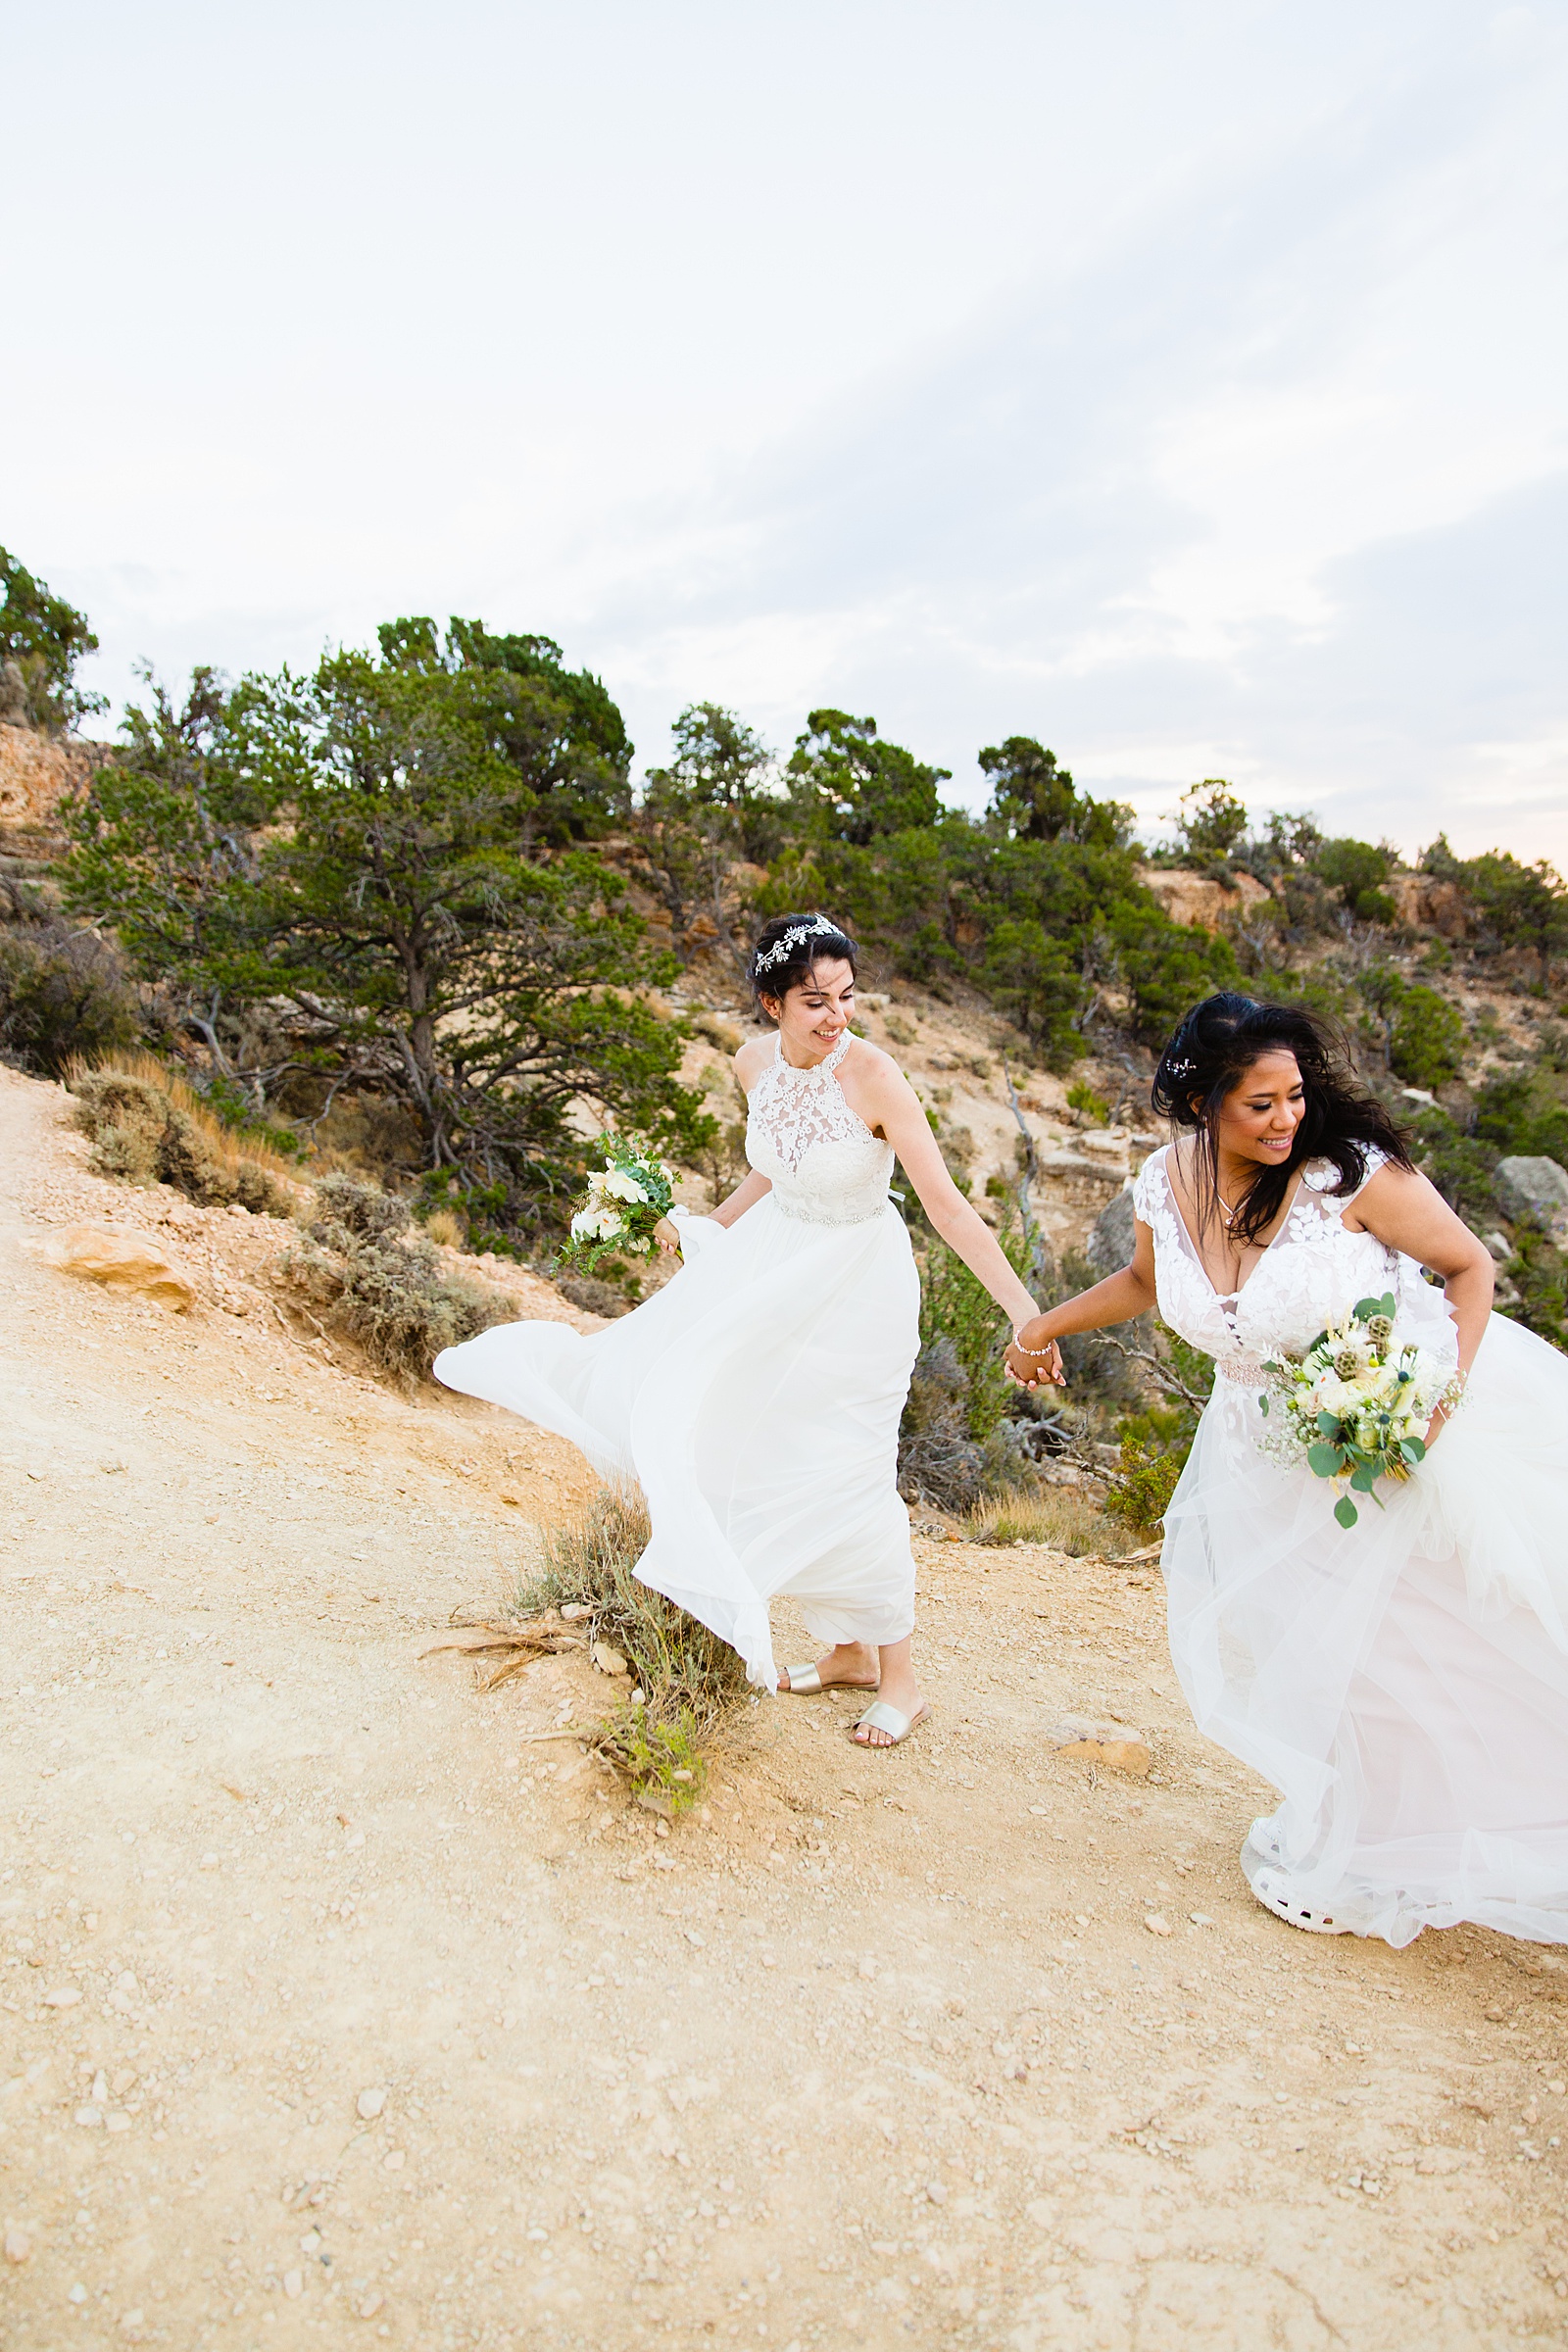 Adventurous LGBTQ+ couple walking together during their Moran Point elopement by Arizona elopement photographer PMA Photography.